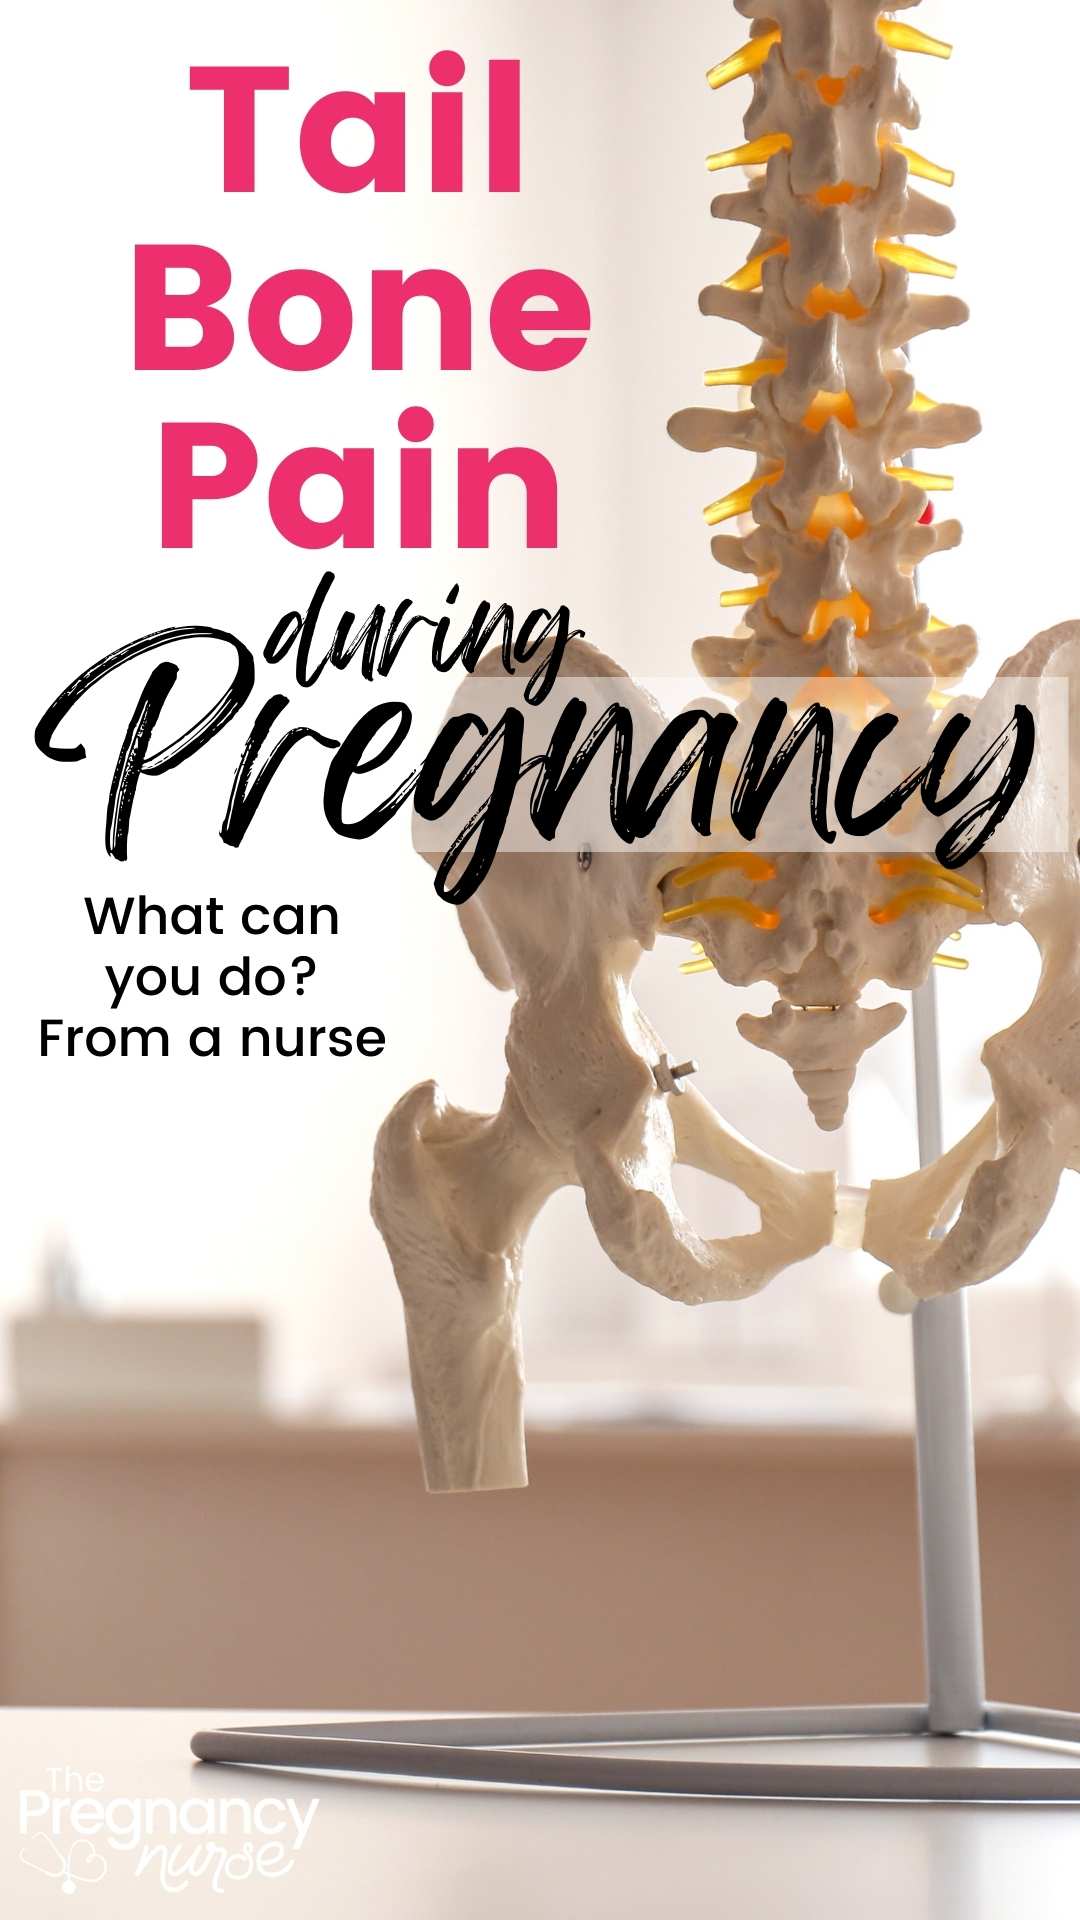 If you're pregnant and are experiencing tailbone pain, don't worry, you're not alone. This post will discuss what tailbone pain during pregnancy is, why it happens, and how to alleviate the discomfort. Read on for more information!